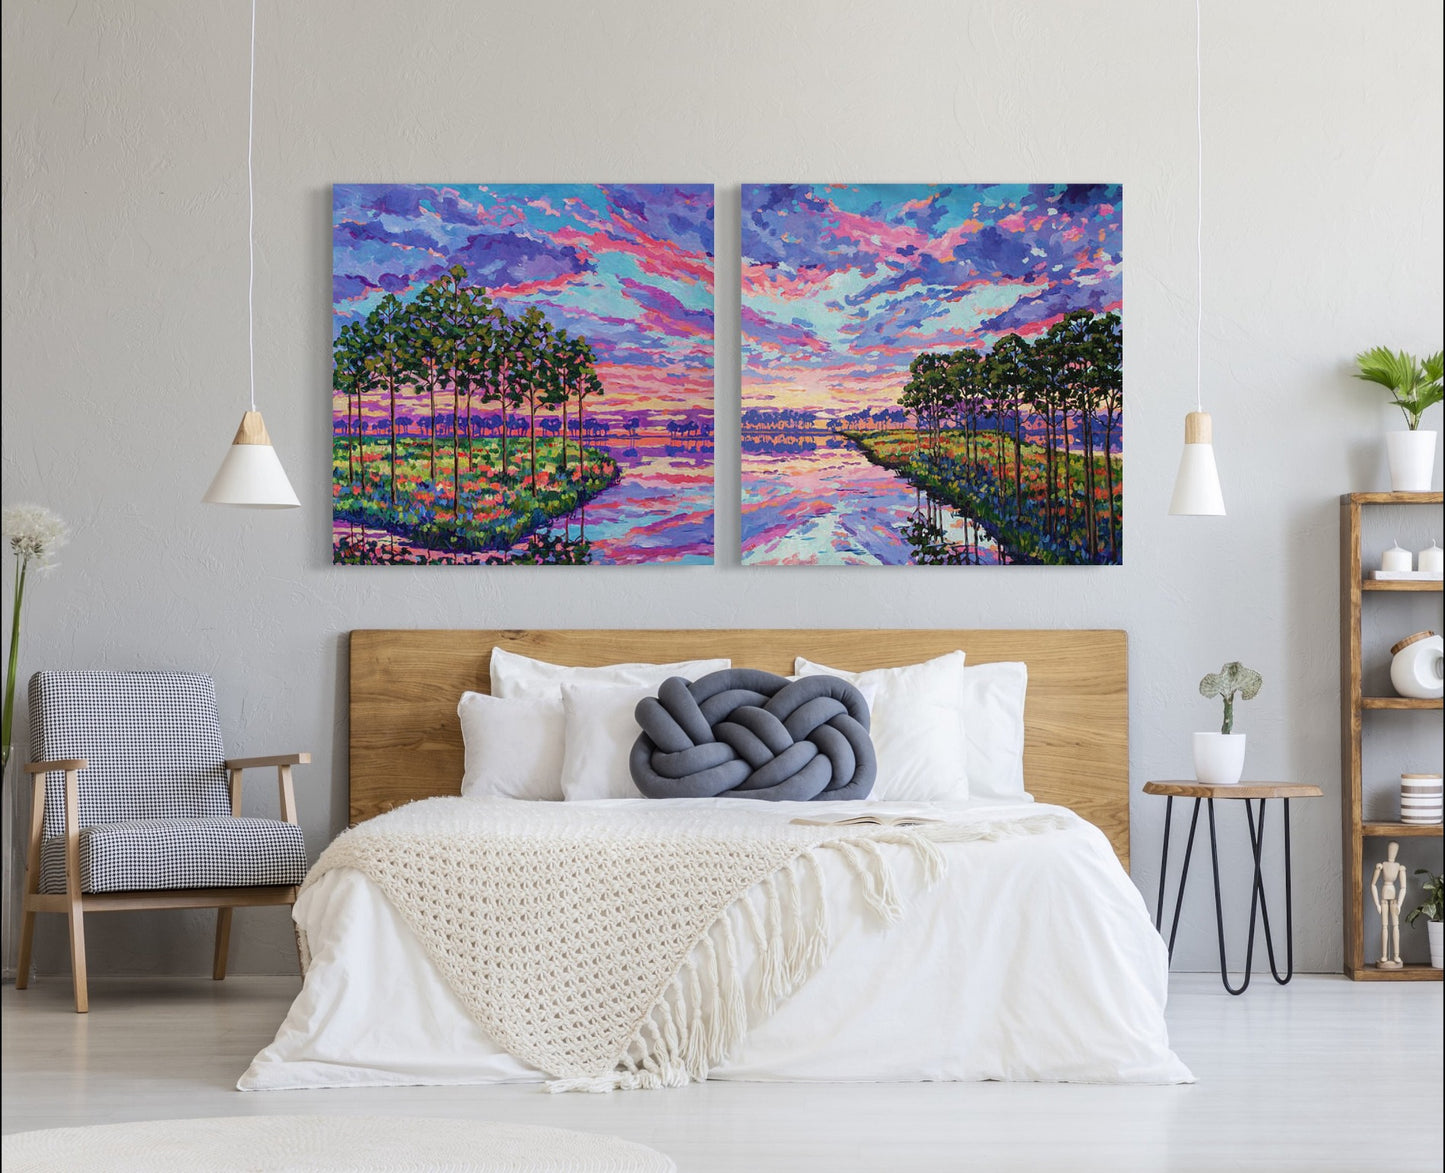 Pines at Sunset Diptych Original Painting